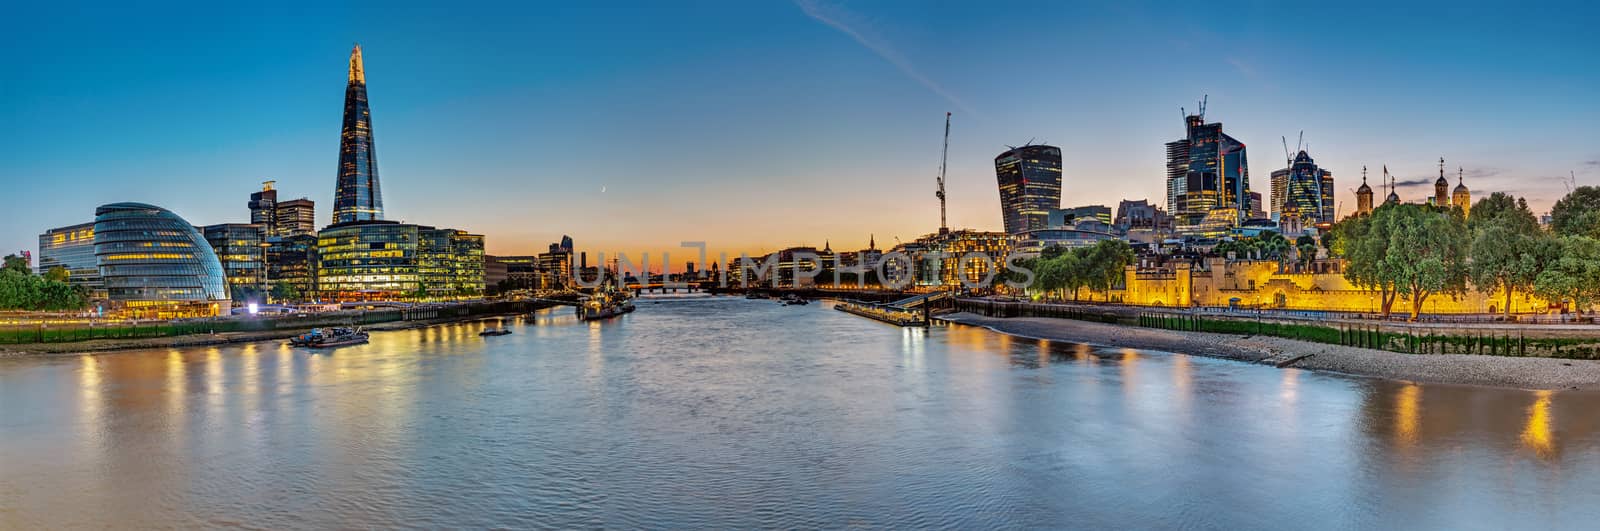 Panorama of the river Thames in London by elxeneize